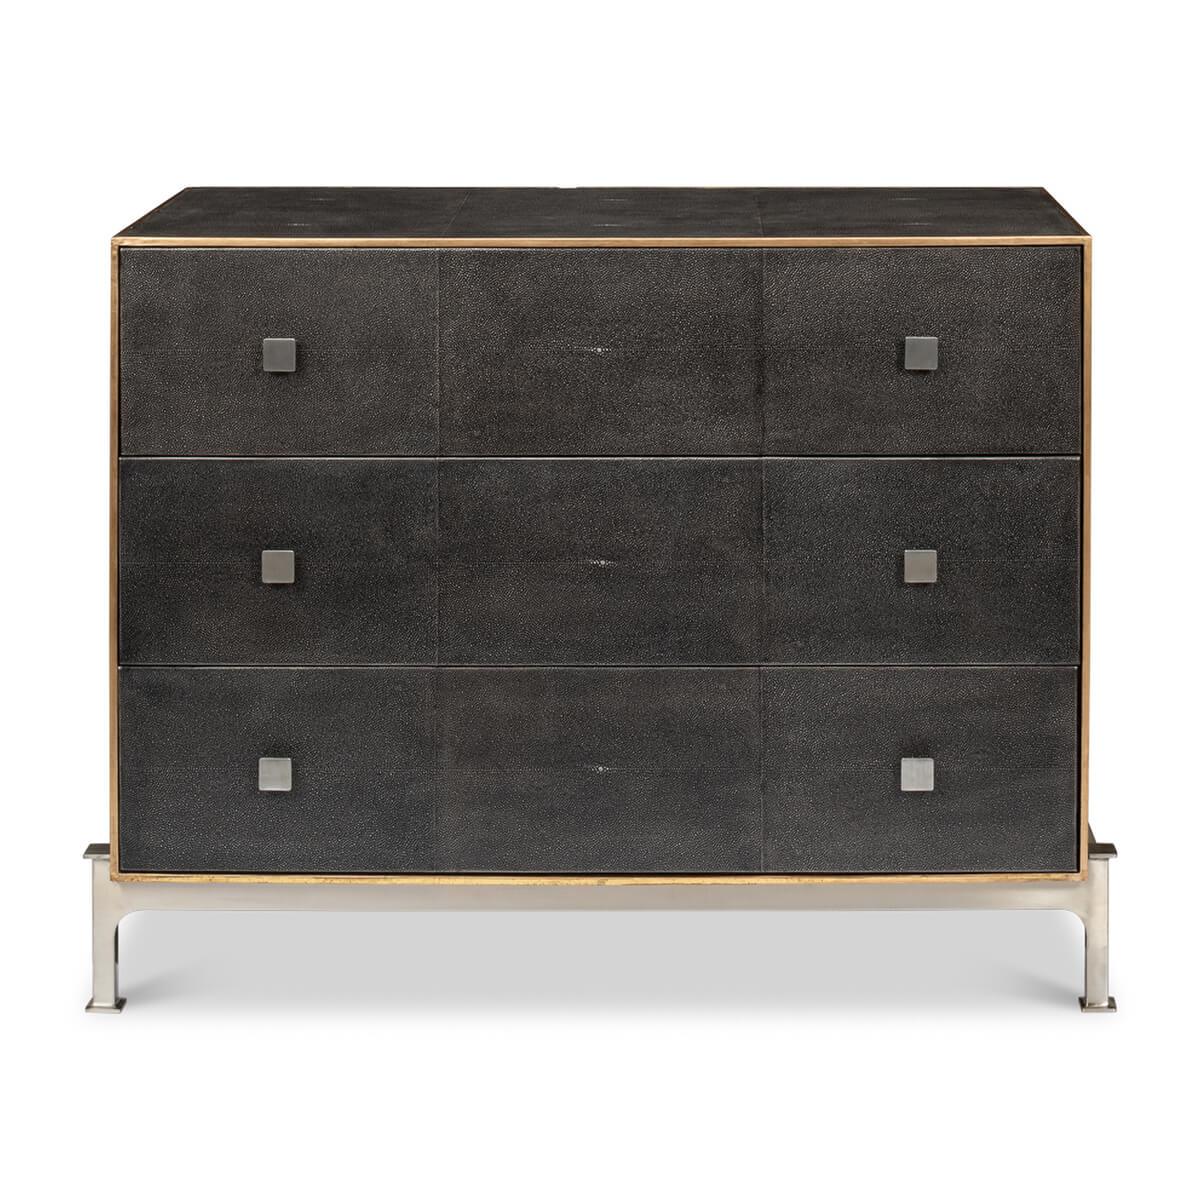 Modern leather wrapped dresser a modern grey shagreen leather and metal three-drawer chest. This piece has a look of luxury and sophistication with mixed colors, metals, and textures. This chest is covered in a grey textured leather modeled after